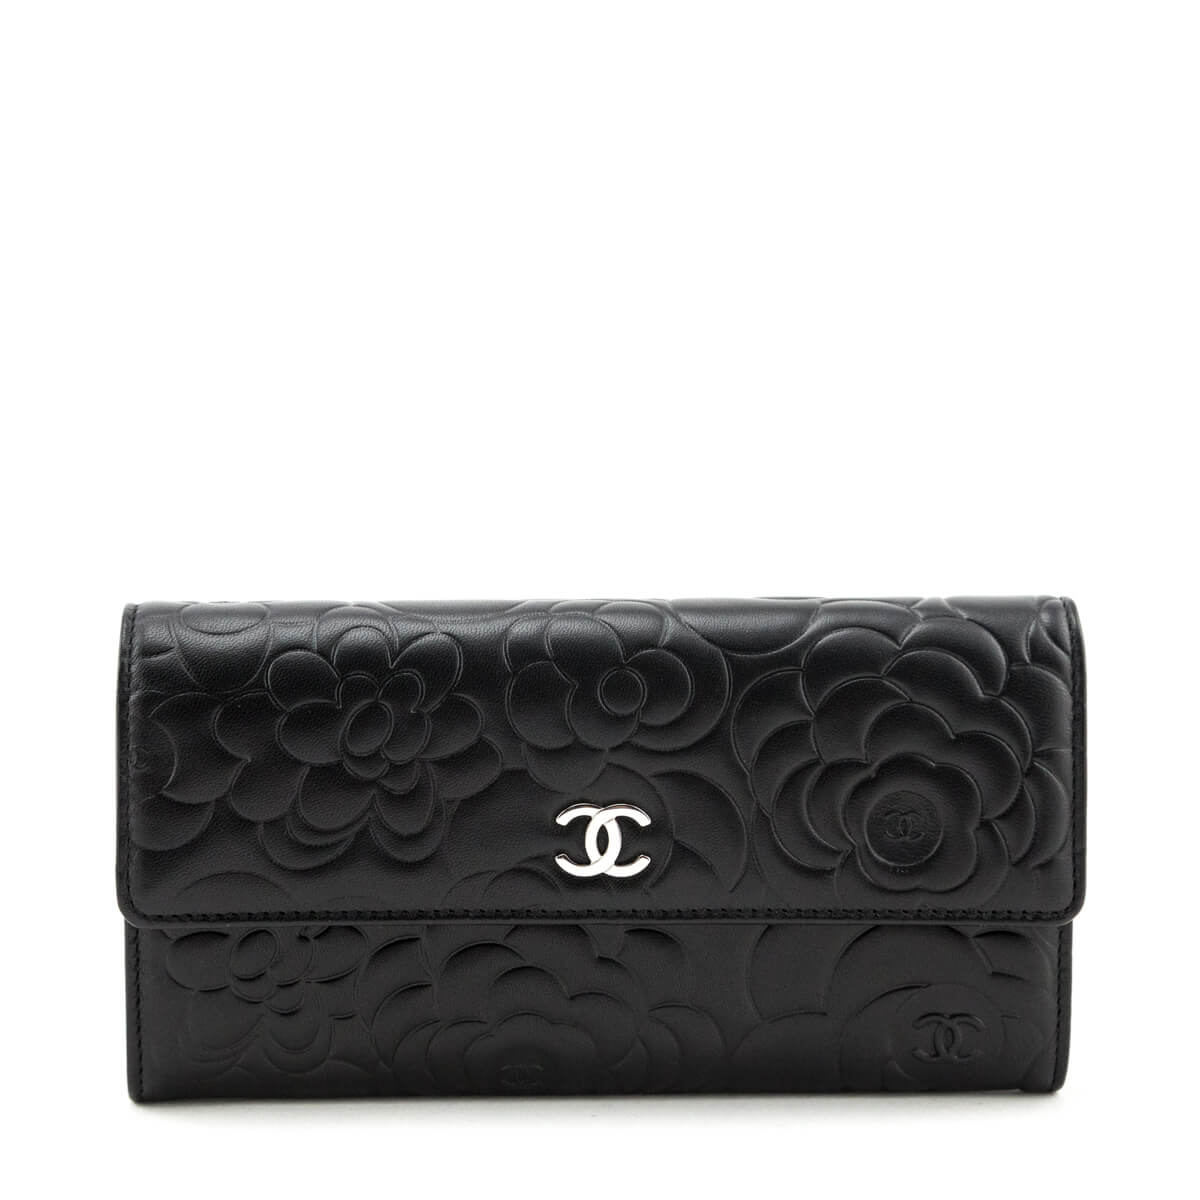 Chanel Black Camellia Embossed Long Flap Wallet - Love that Bag etc - Preowned Authentic Designer Handbags & Preloved Fashions